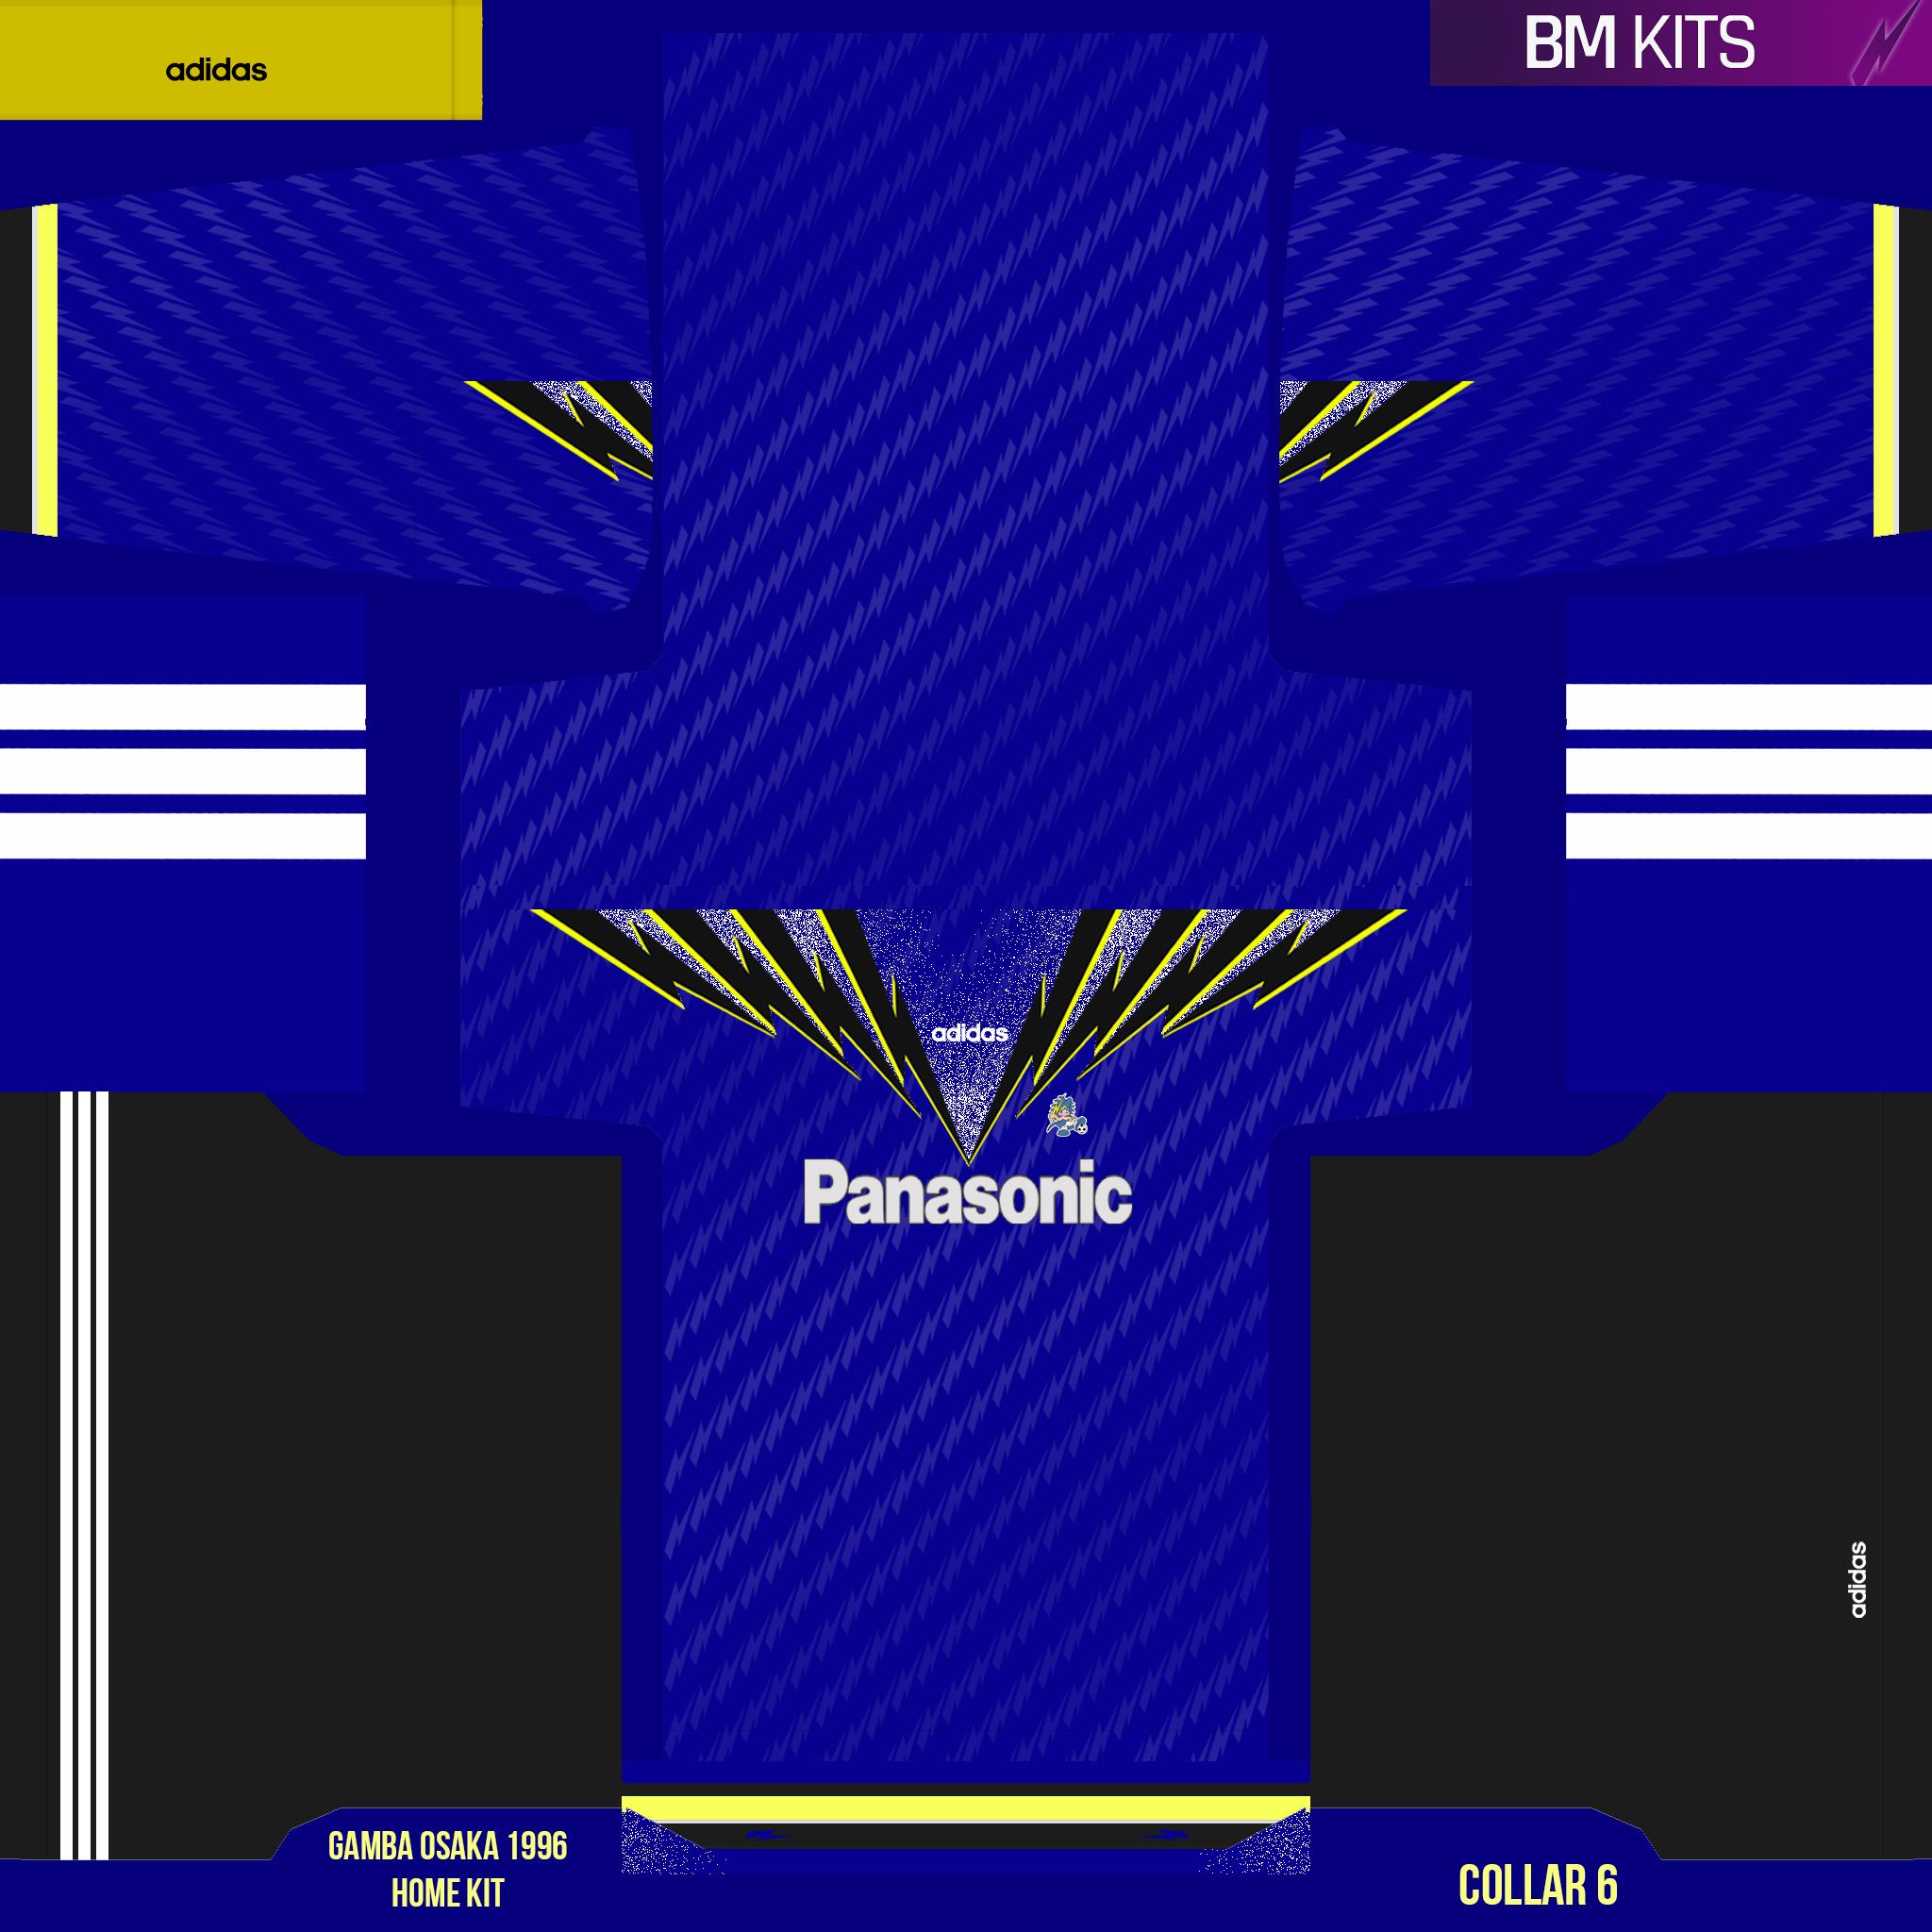 Brunomanoelkits Download Now 1996 Gamba Osaka Home And Away Kits For Pes19 Efoootballpes Available In My Google Drive Folder Link On Fixed Tweet T Co Lxbptkfbyh